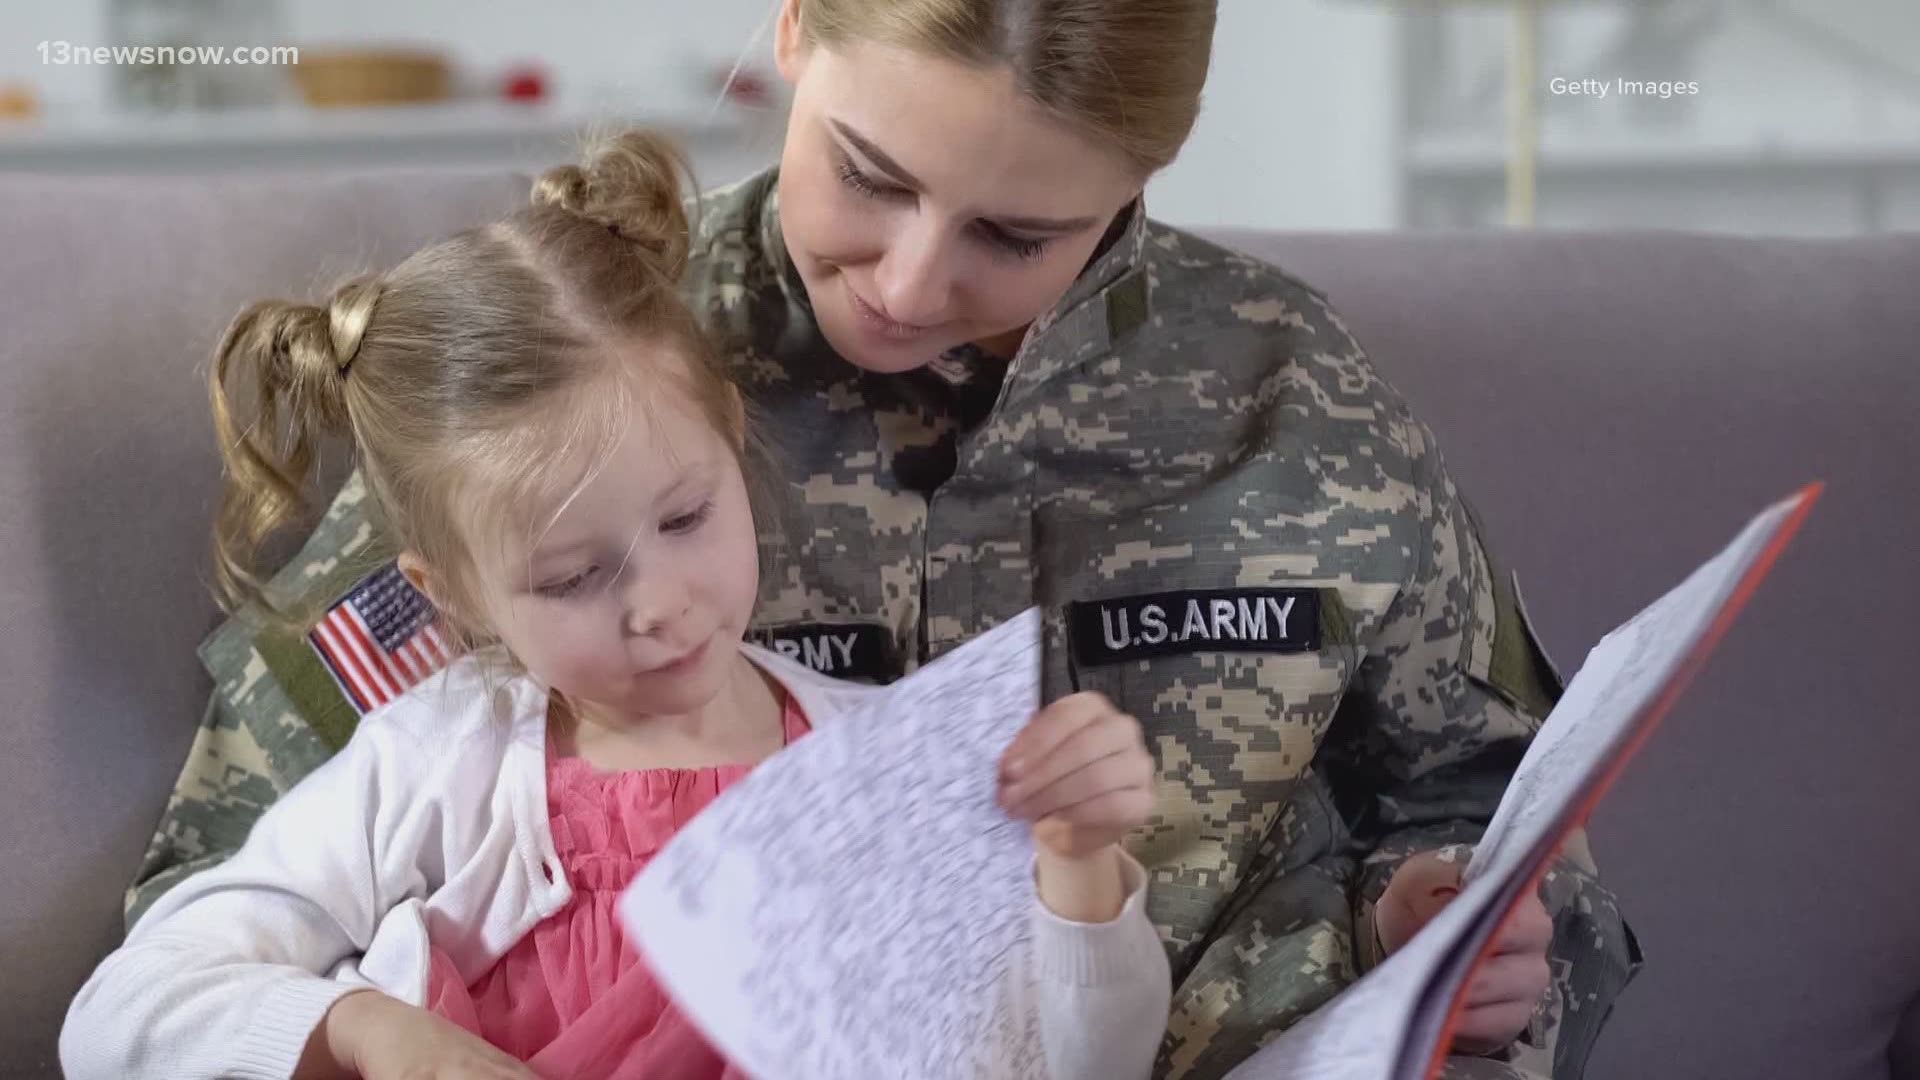 The Military Child Education Coalition serves children of service members.